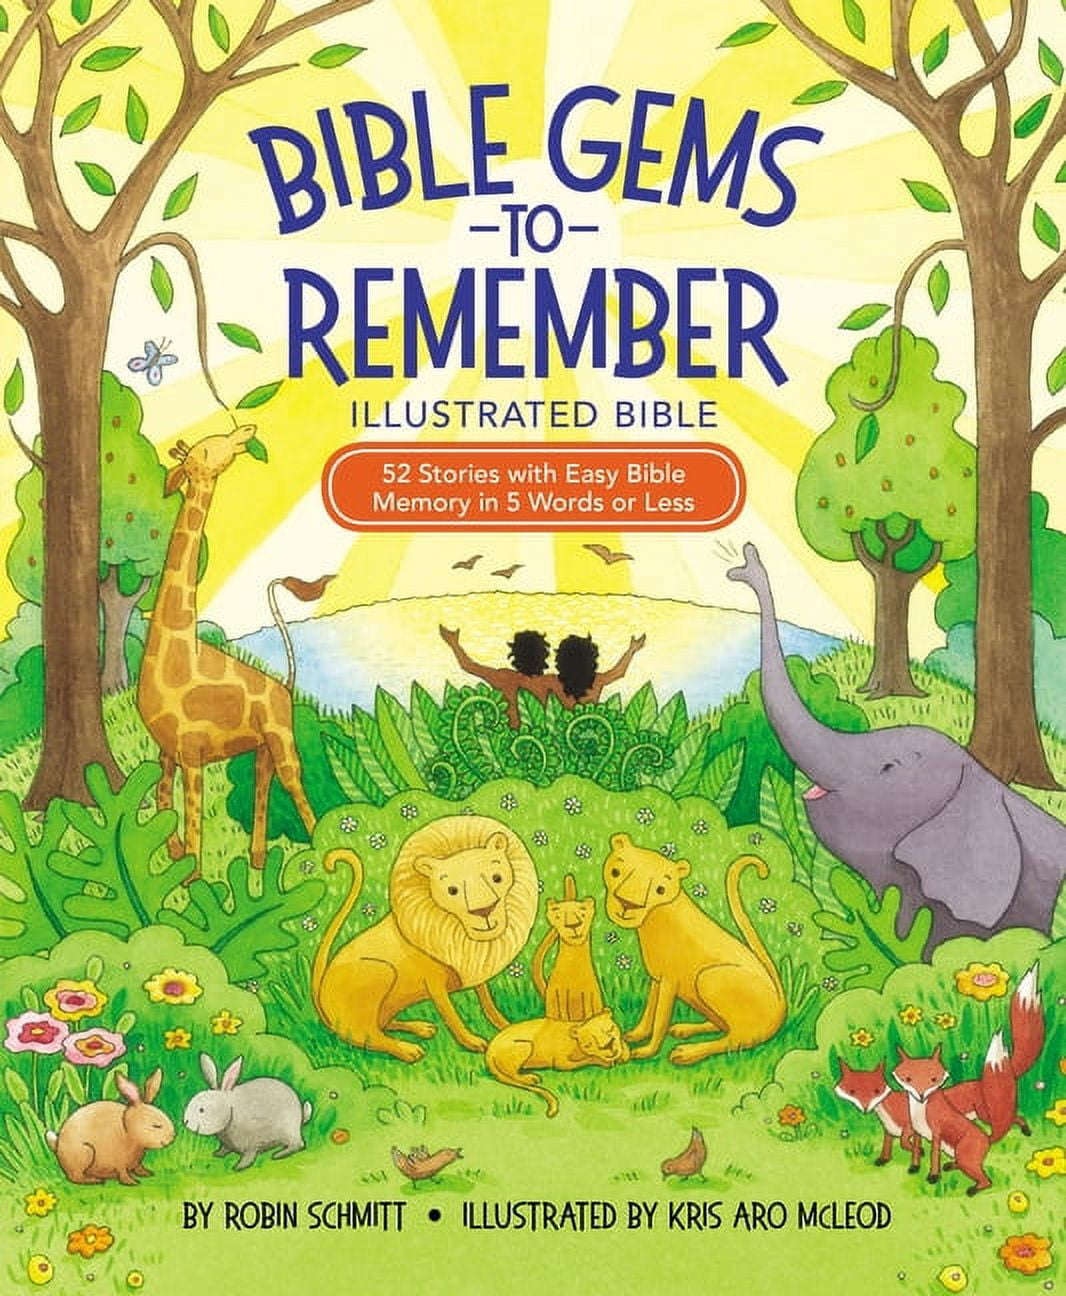 136243 Bible Gems To Remember Illustrated Bible